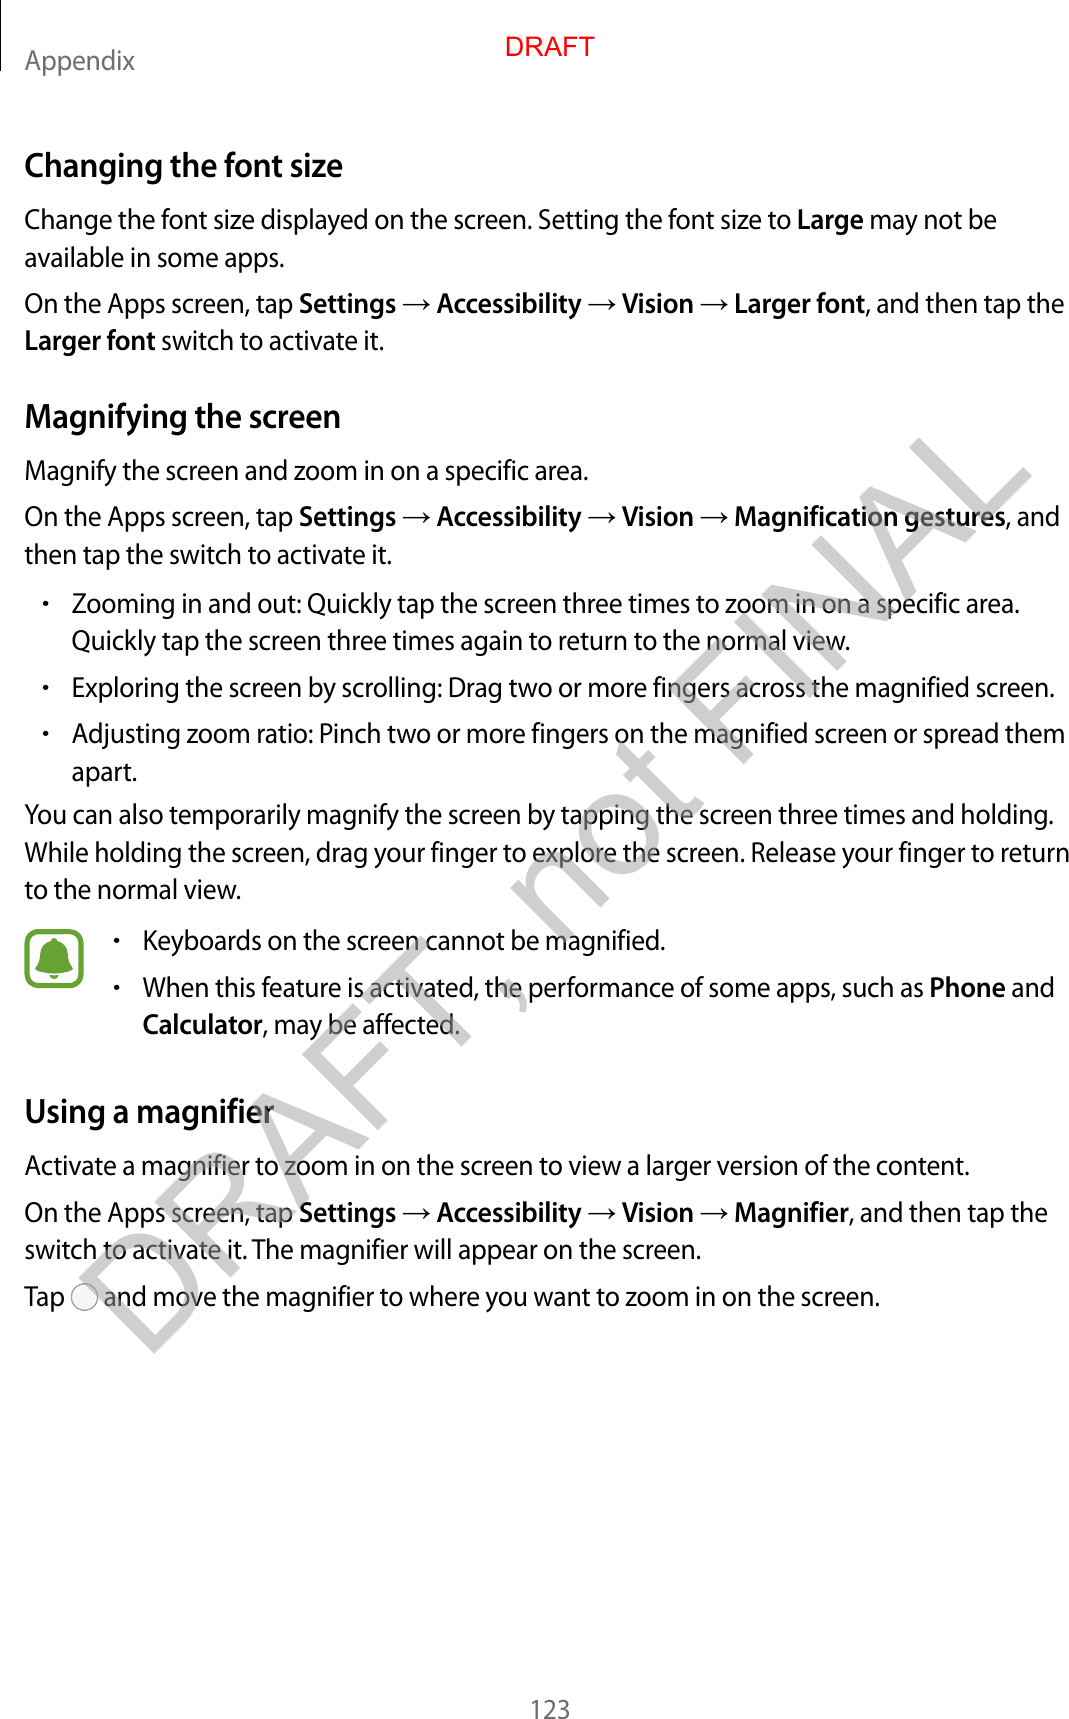 Appendix123Changing the font sizeChange the font size displayed on the screen. Setting the font size to Large may not be available in some apps.On the Apps screen, tap Settings  Accessibility  Vision  Larger font, and then tap the Larger font switch to activate it.Magnifying the screenMagnify the screen and zoom in on a specific area.On the Apps screen, tap Settings  Accessibility  Vision  Magnification gestures, and then tap the switch to activate it.•Zooming in and out: Quickly tap the screen three times to zoom in on a specific area. Quickly tap the screen three times again to return to the normal view.•Exploring the screen by scrolling: Drag two or more fingers across the magnified screen.•Adjusting zoom ratio: Pinch two or more fingers on the magnified screen or spread them apart.You can also temporarily magnify the screen by tapping the screen three times and holding. While holding the screen, drag your finger to explore the screen. Release your finger to return to the normal view.•Keyboards on the screen cannot be magnified.•When this feature is activated, the performance of some apps, such as Phone and Calculator, may be affected.Using a magnifierActivate a magnifier to zoom in on the screen to view a larger version of the content.On the Apps screen, tap Settings  Accessibility  Vision  Magnifier, and then tap the switch to activate it. The magnifier will appear on the screen.Tap   and move the magnifier to where you want to zoom in on the screen.DRAFTDRAFT, not FINAL